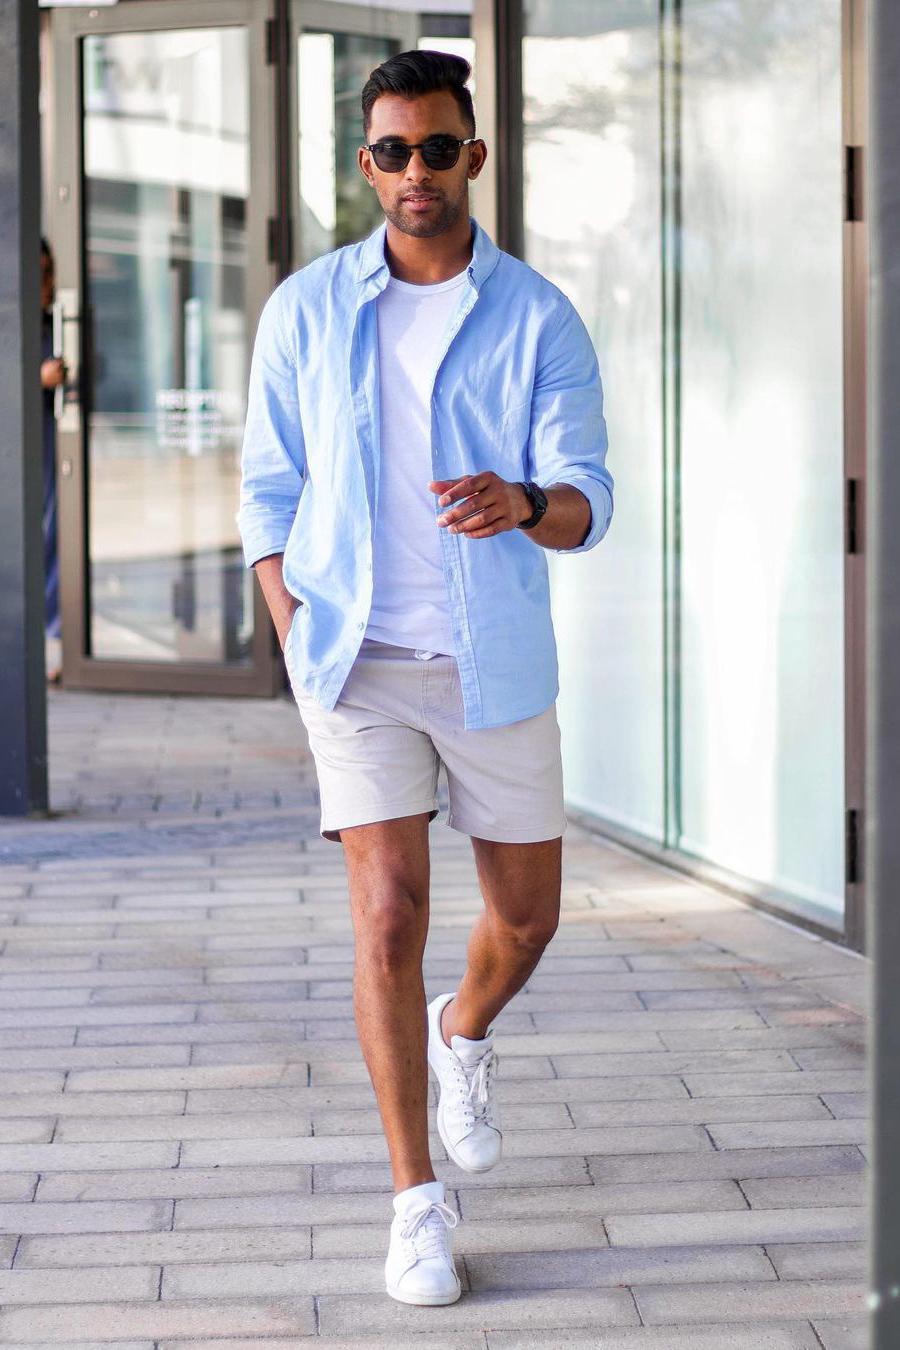 Blue long-sleeve shirt, white crew neck t-shirt, gray shorts, and white sneakers outfit